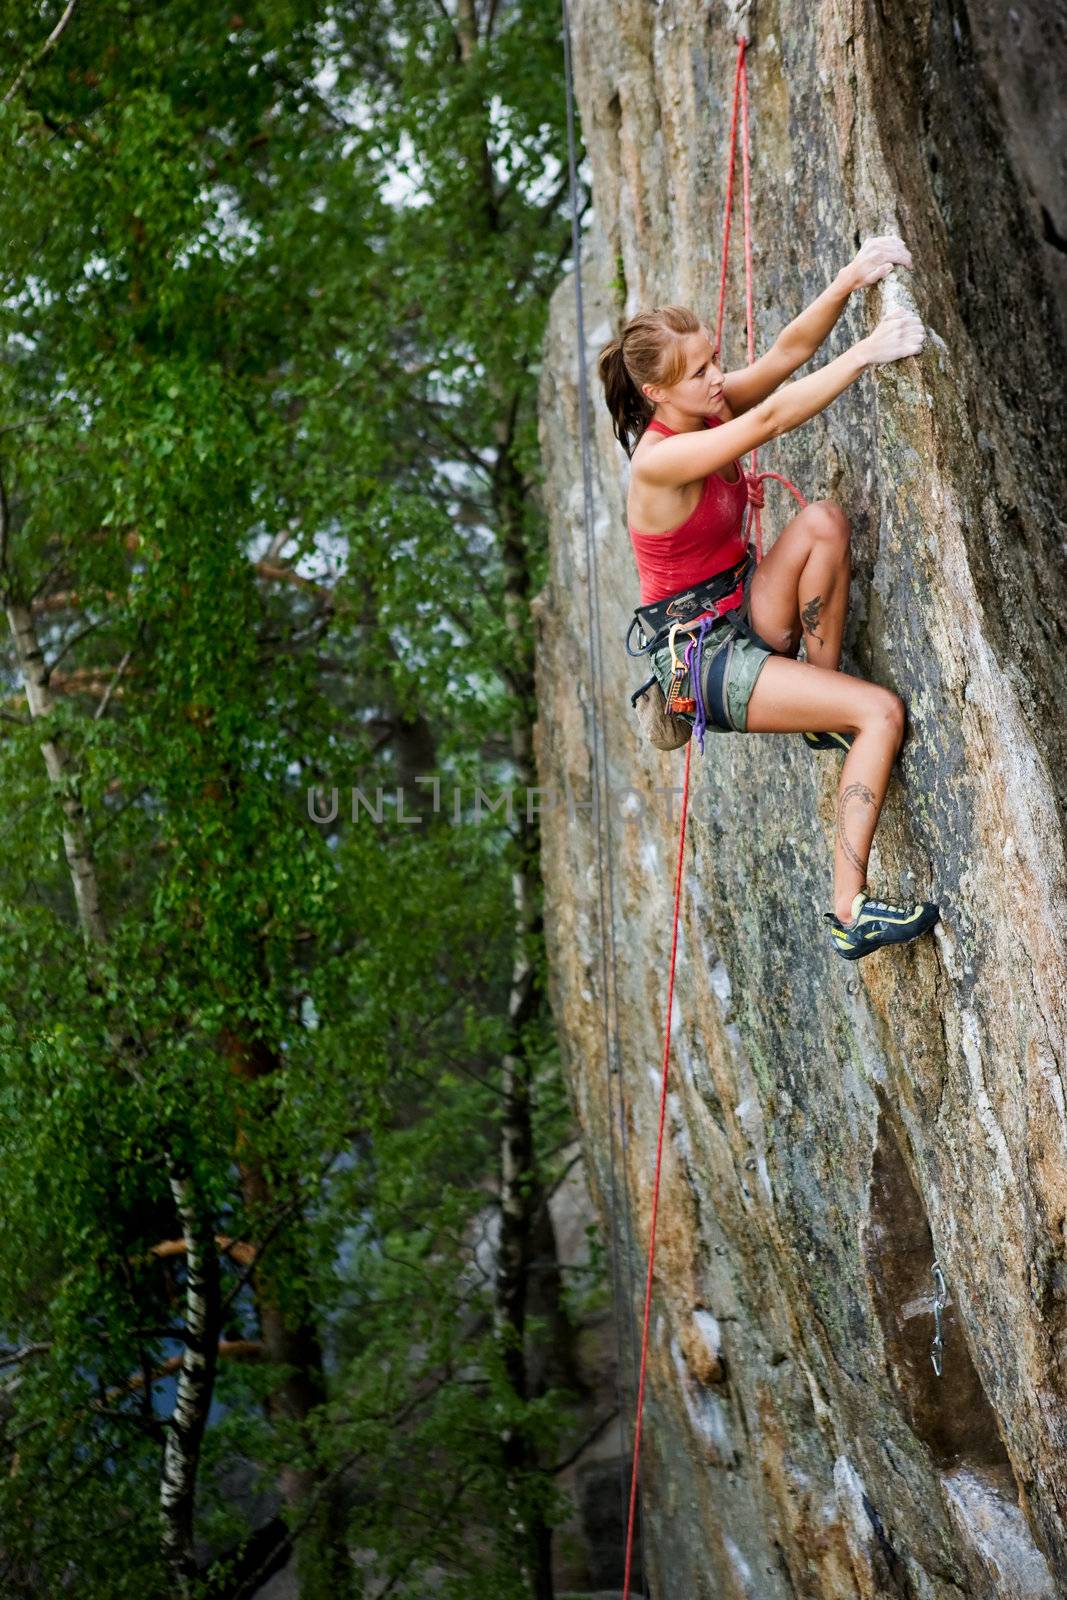 An eager female climber on a steep rock face looks for the next hold. Shallow depth of field is used to isolated the climber with the focus on the head.